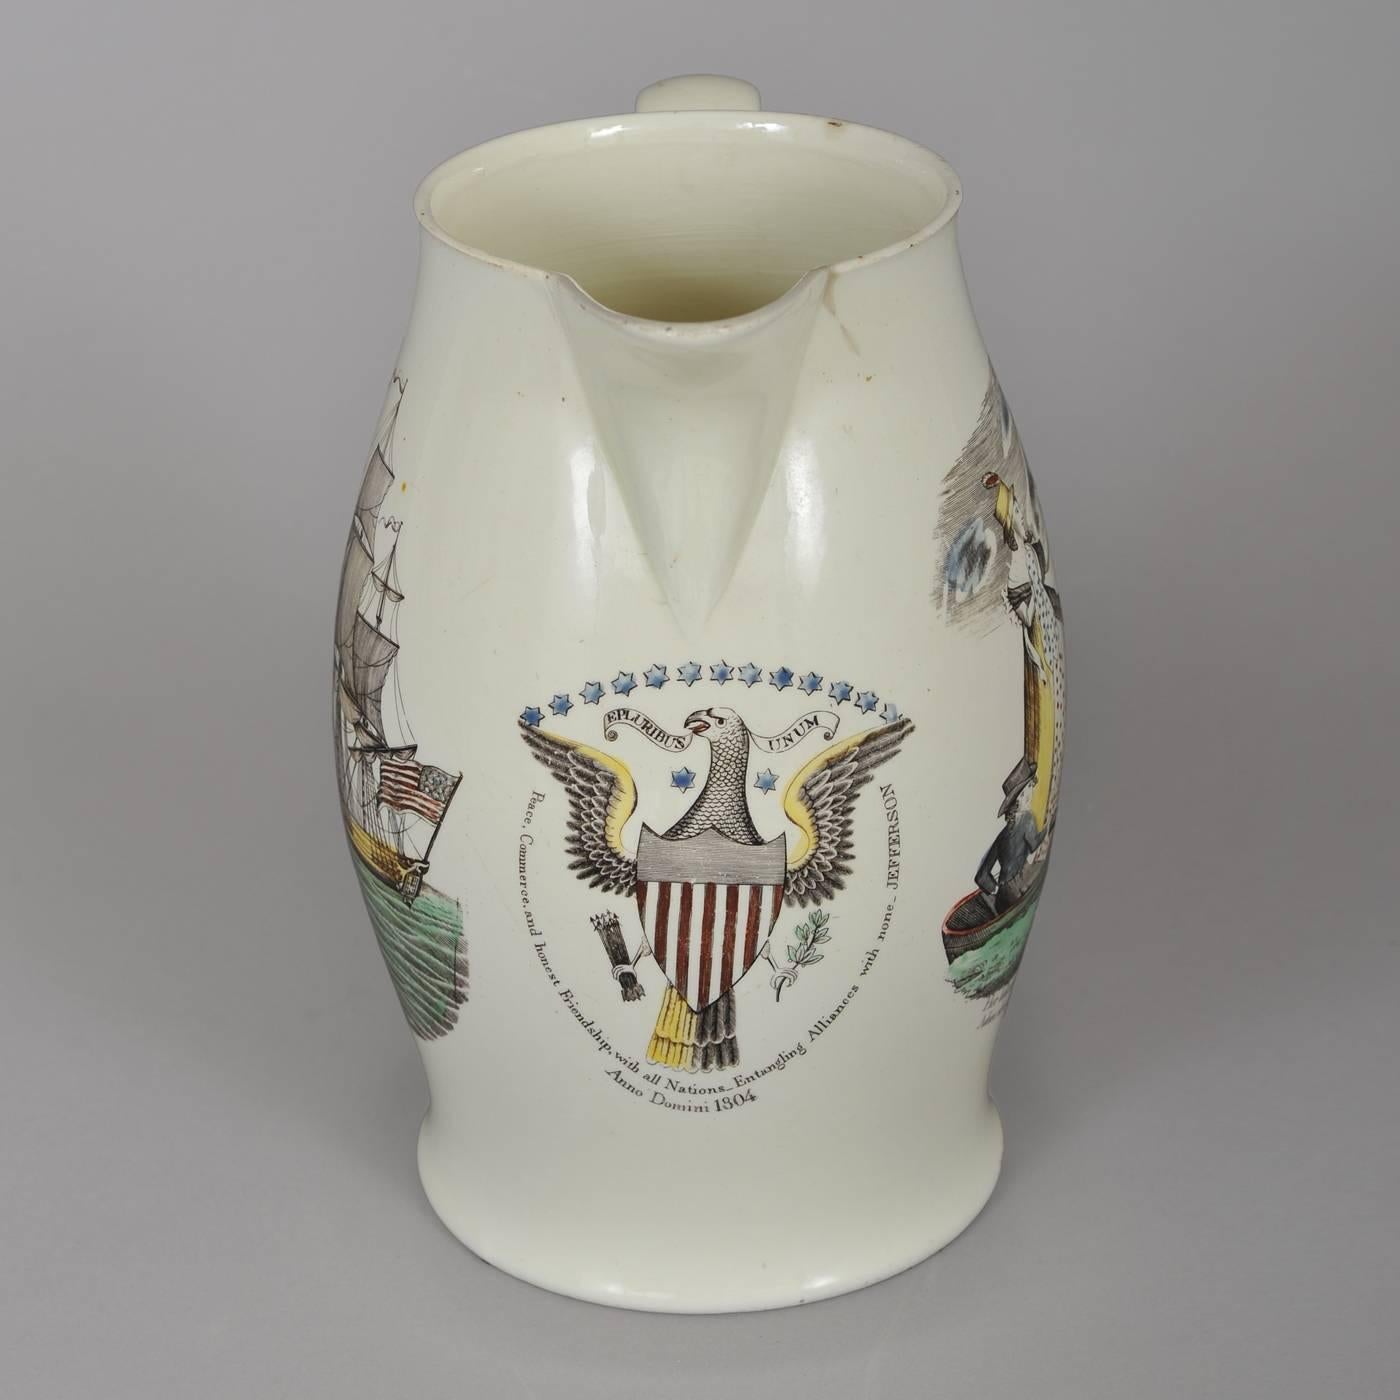 Early 19th century creamware jug decorated with an American three masted sailing ship, a lady bidding farewell to a departed ship and the American seal of a winged eagle below the spout with the inscription: Peace, Commerce and honest Friendship,